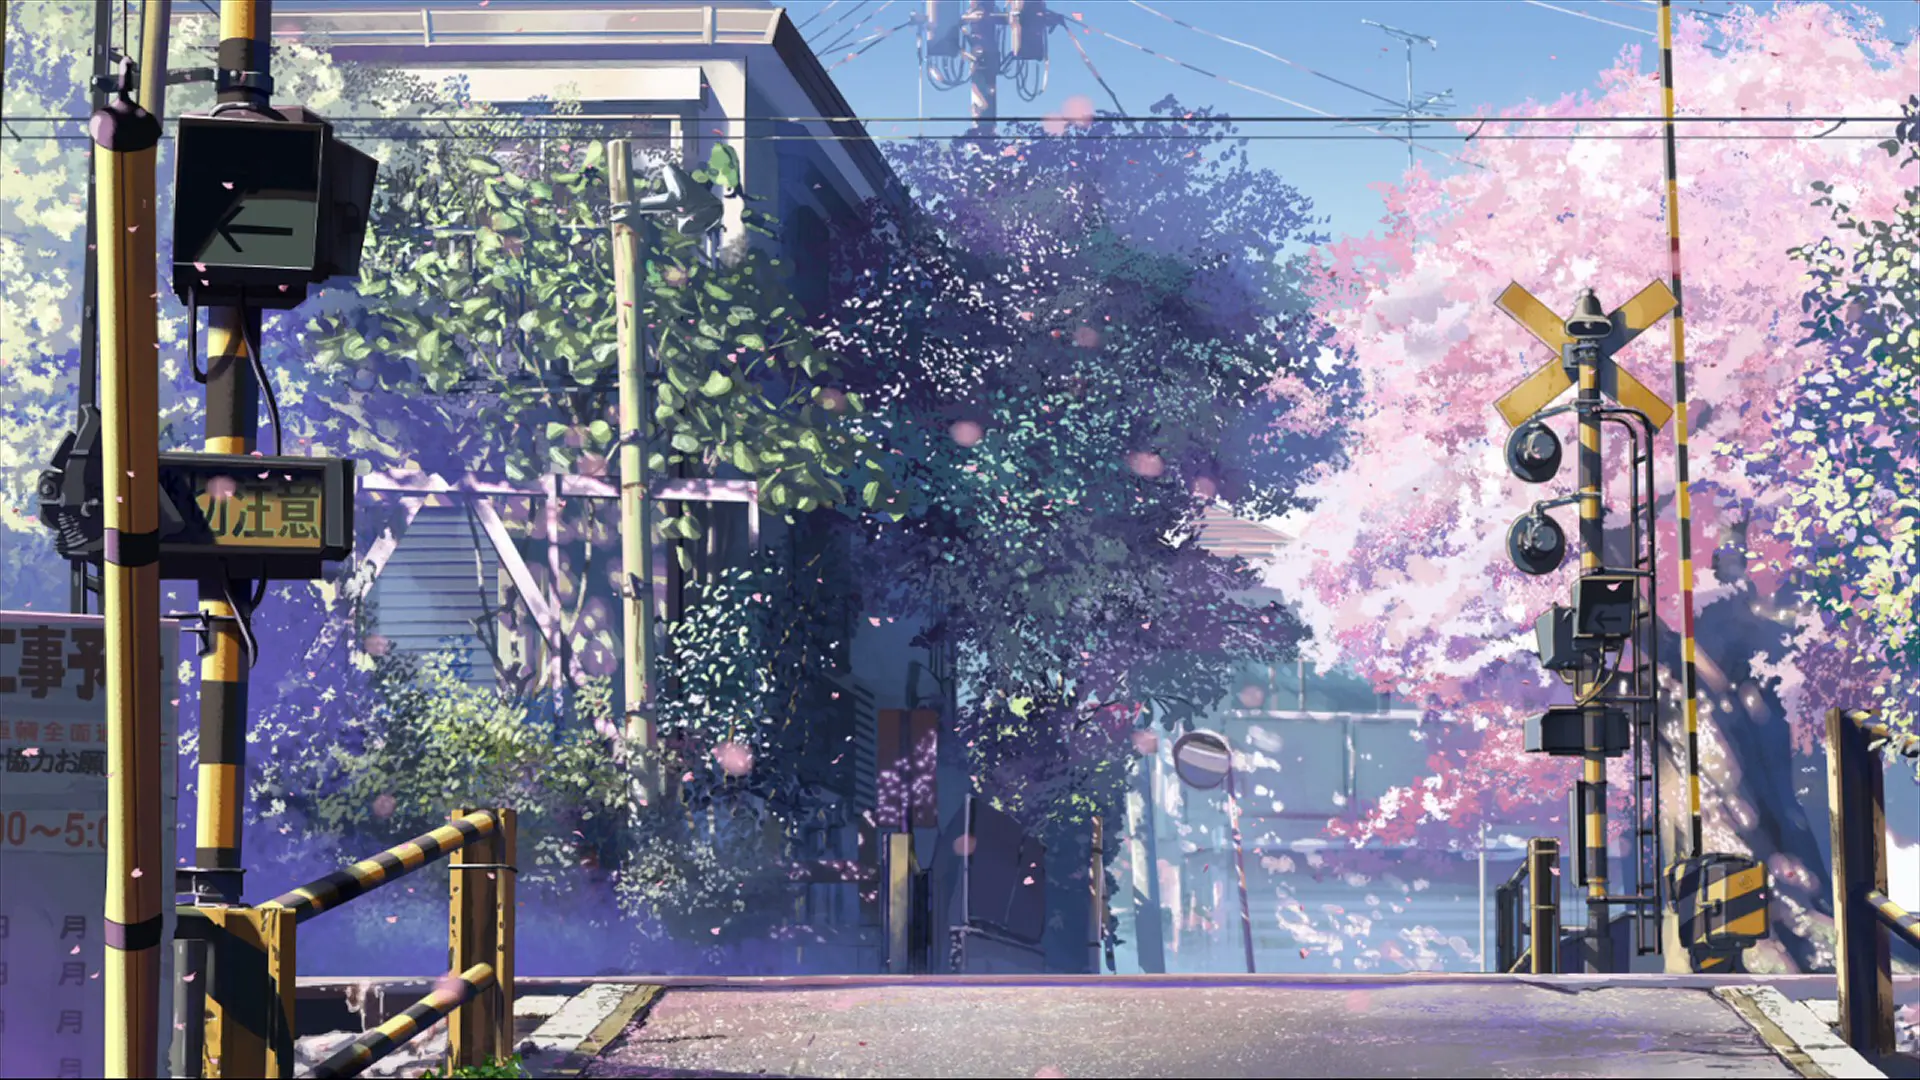 /en/posts/the-end-of-another-semester/5-centimeters-per-second.webp